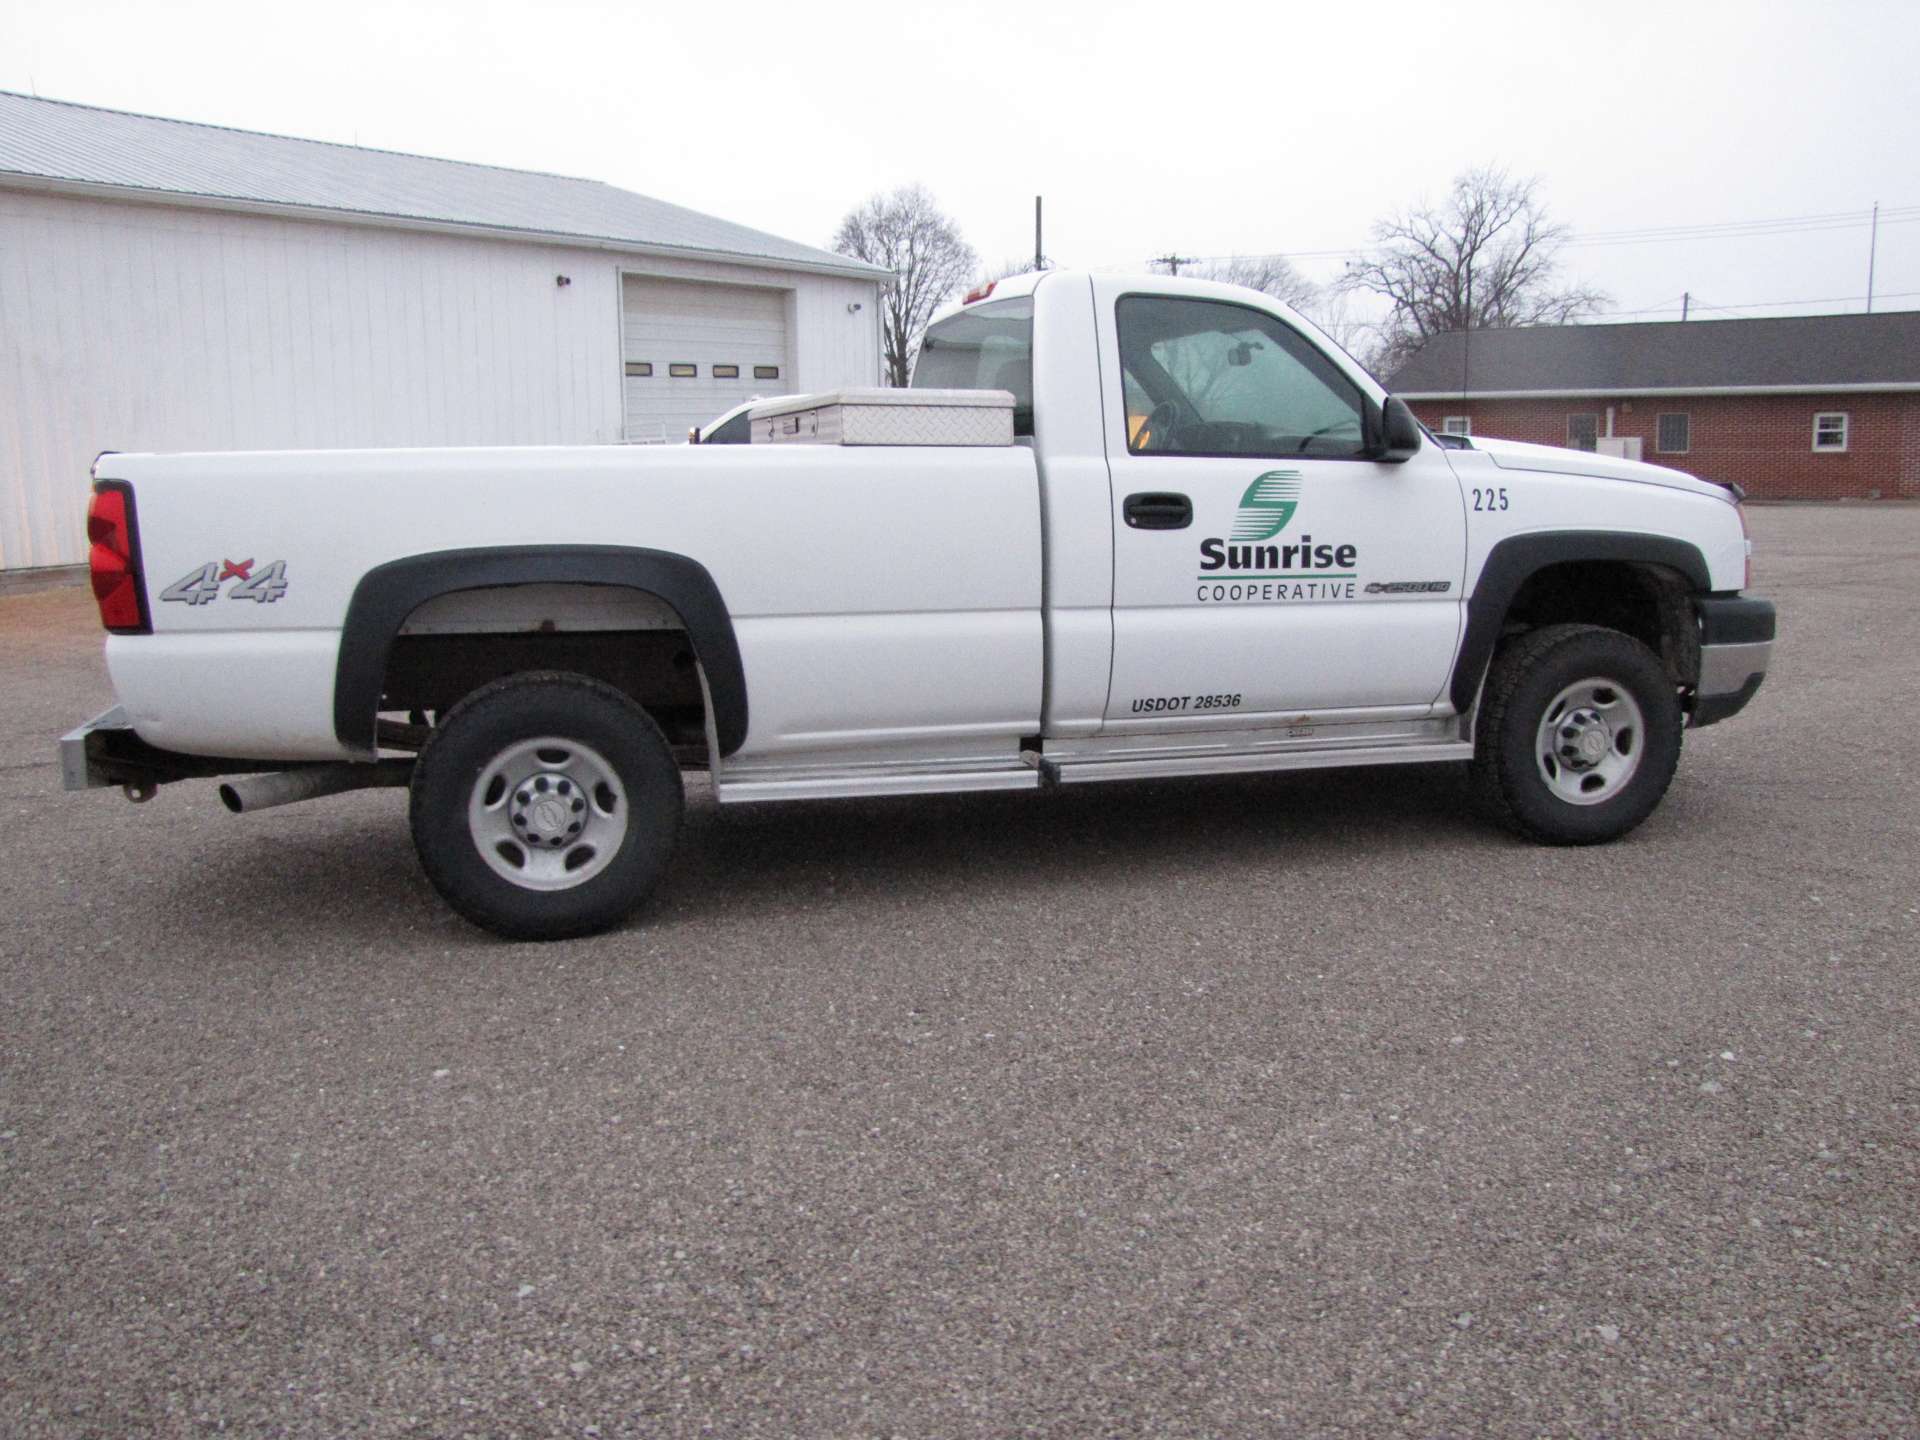 2006 Chevy 2500 HD pickup truck - Image 10 of 65